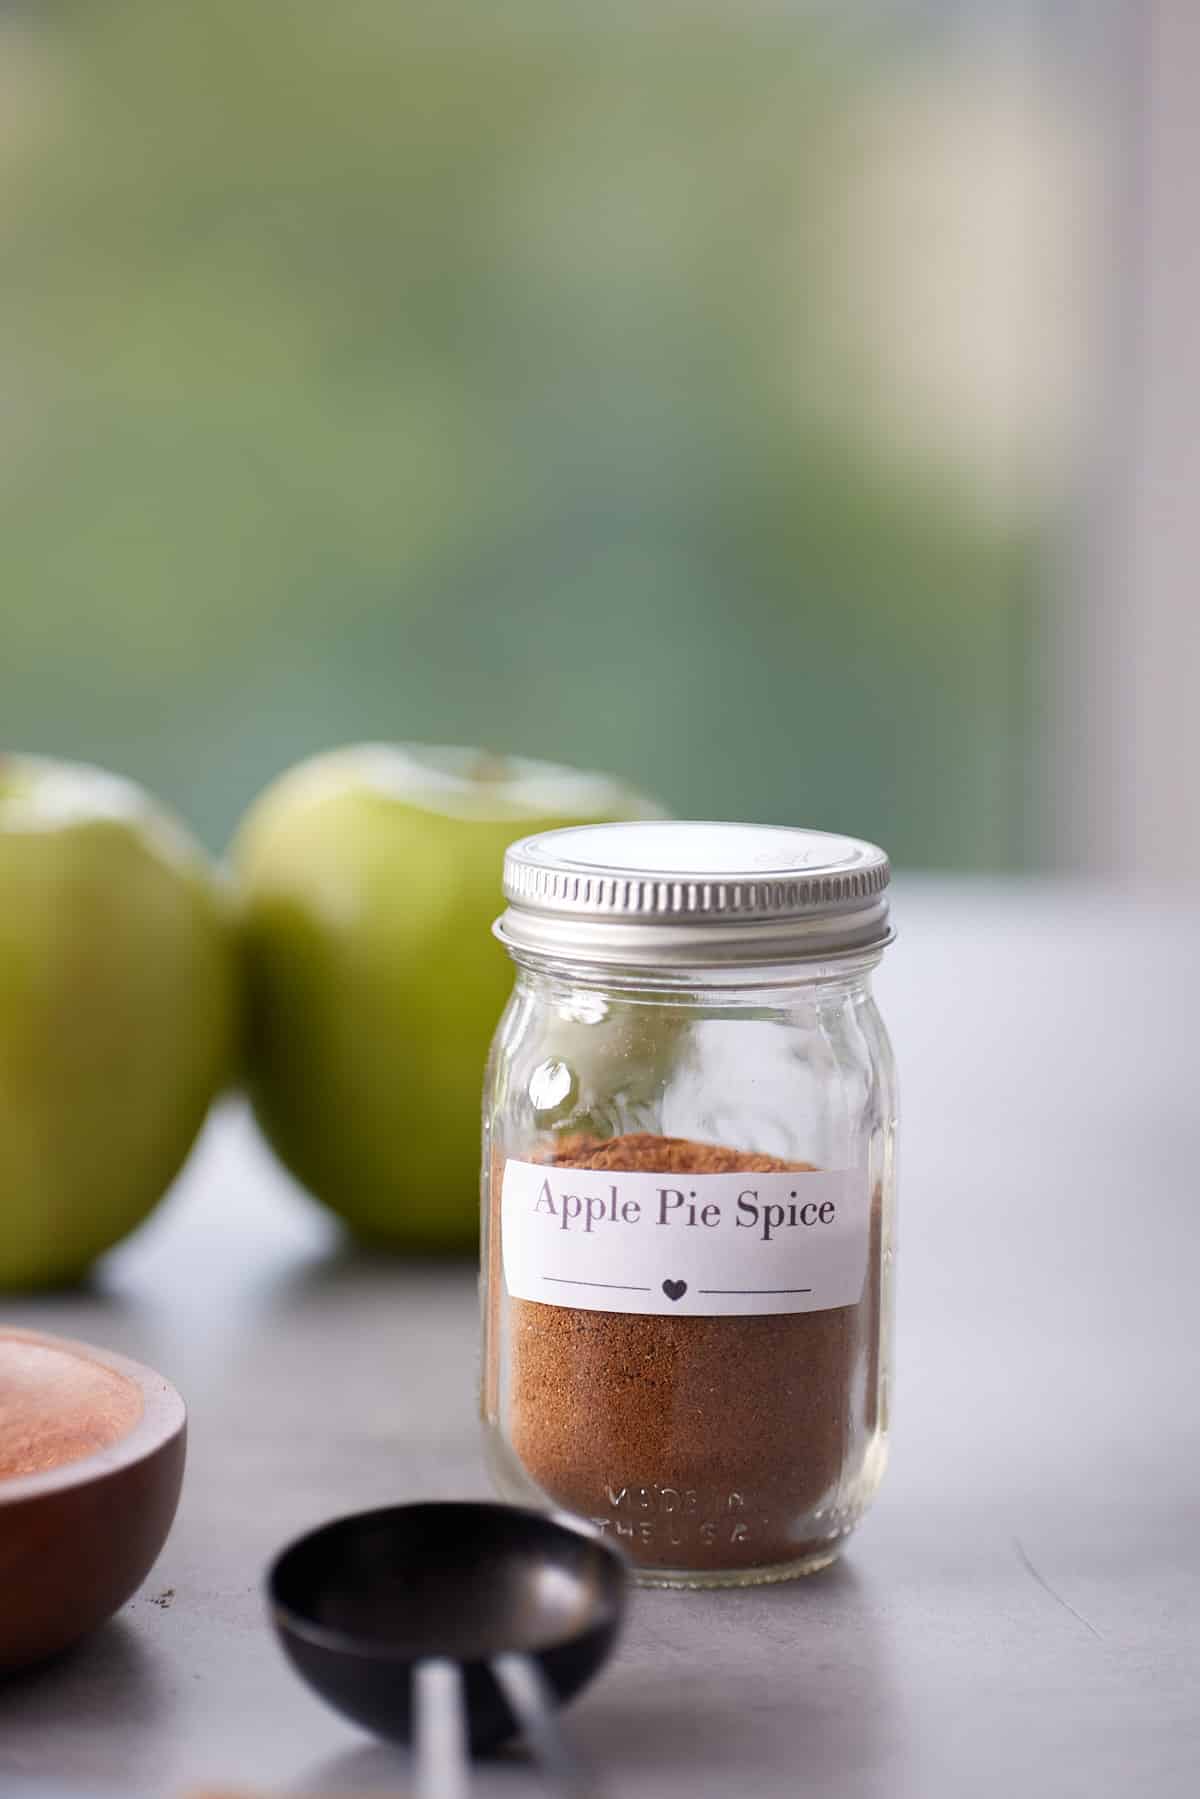 Jar of apple pie spice mix with green apples and a tablespoon